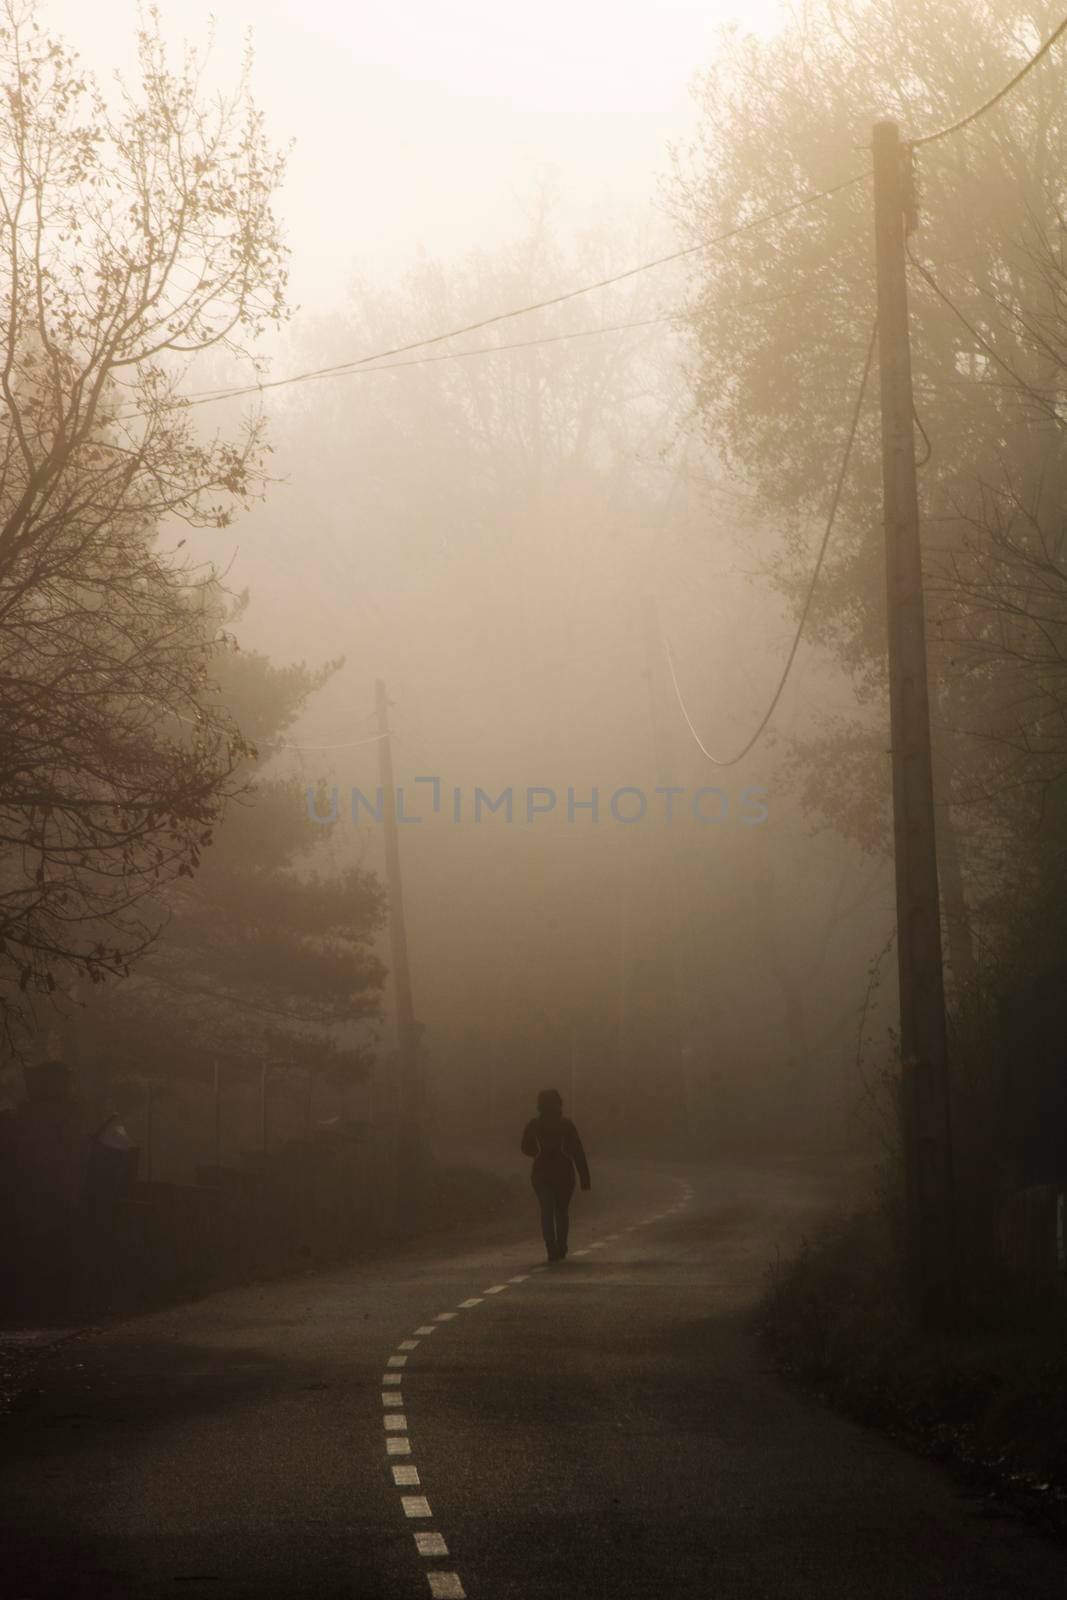 Walking alone on the foggy road by ValentimePix